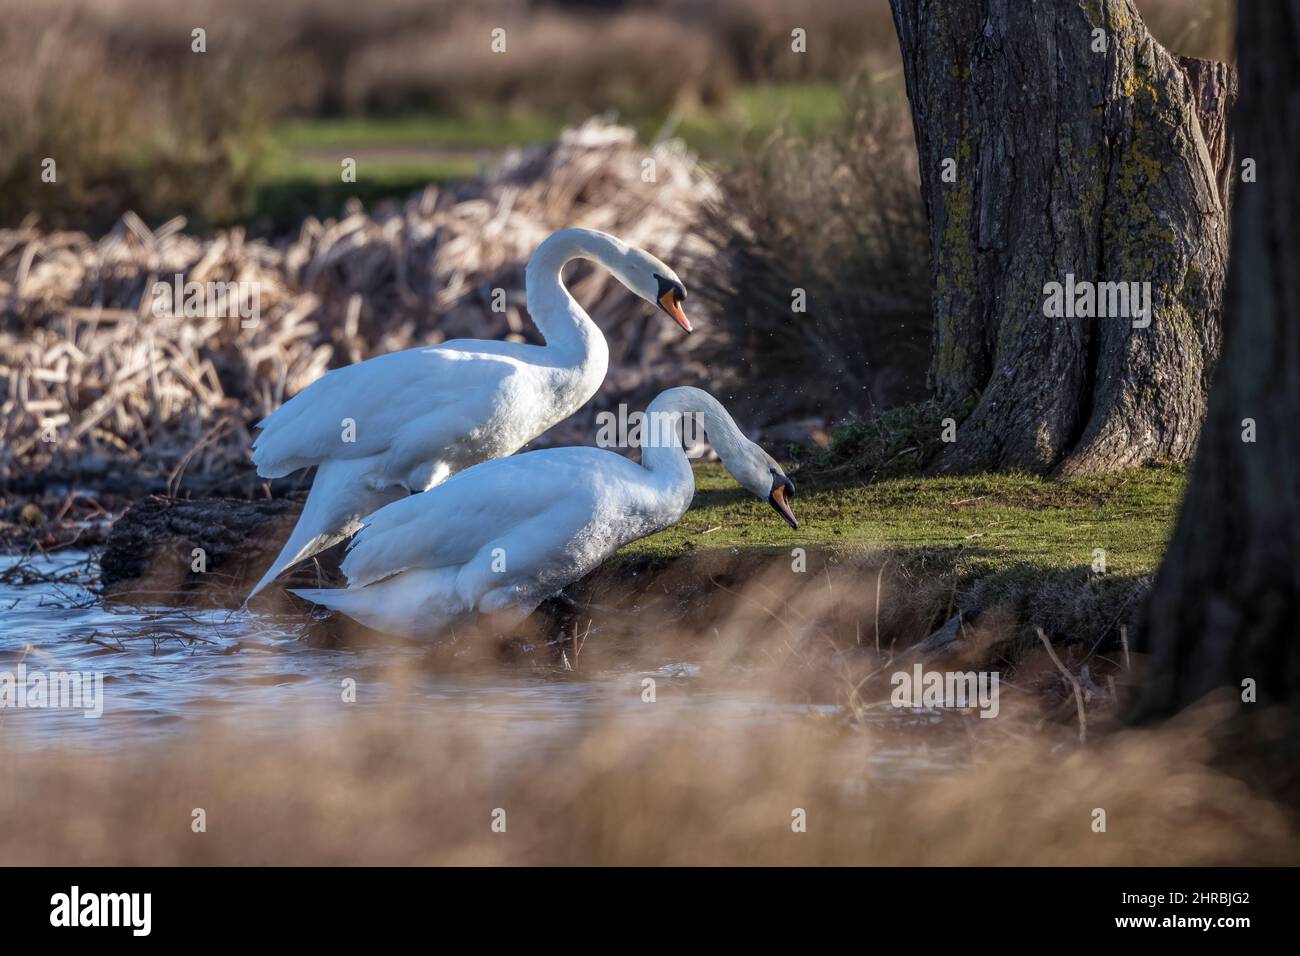 Two mute swans attempting to climb the bank of the pond Stock Photo